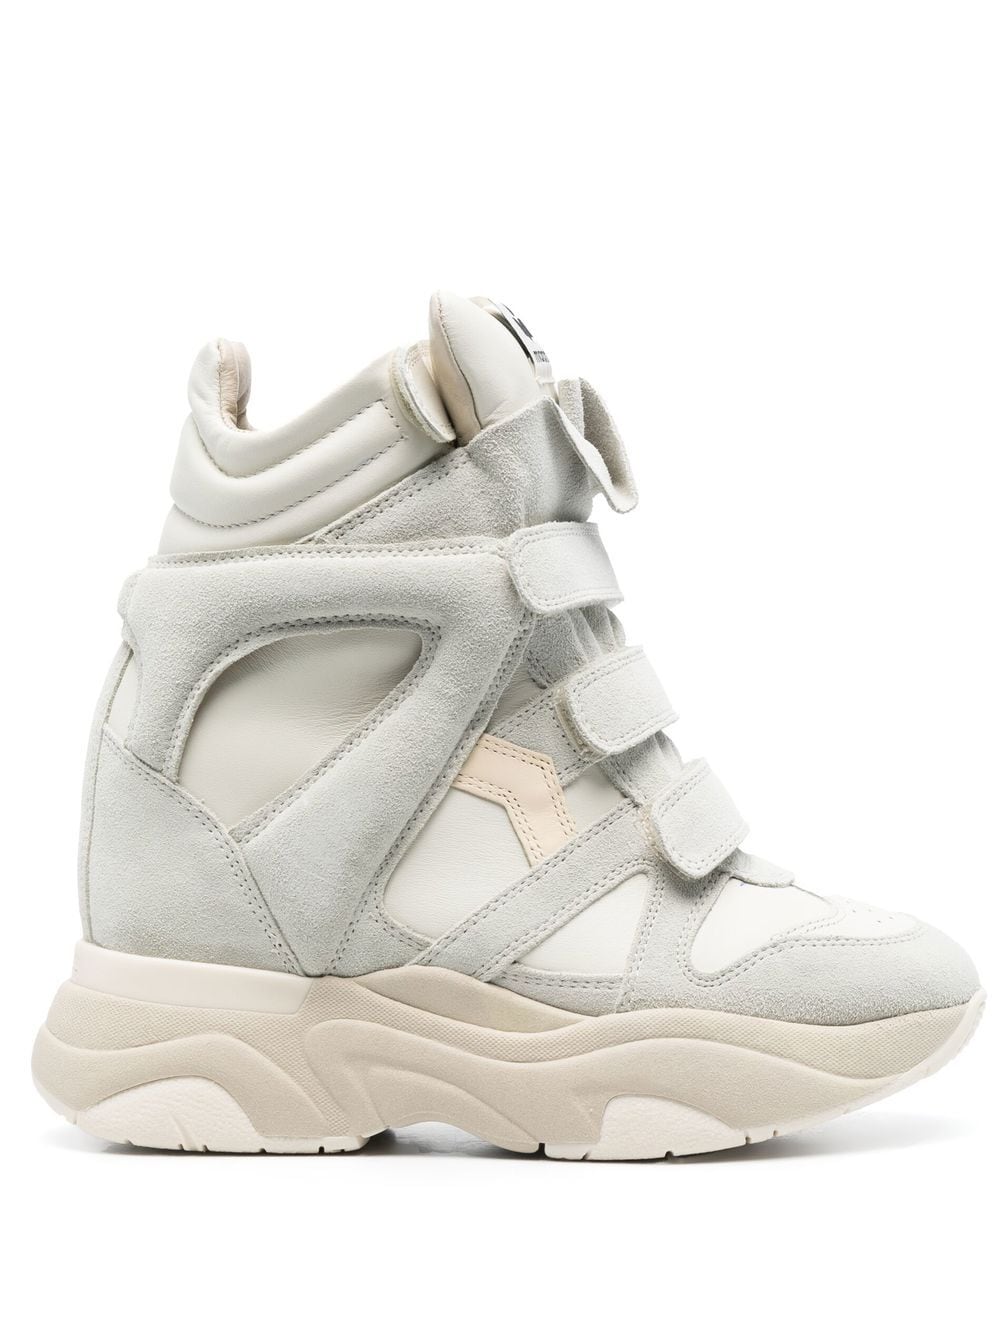 ISABEL MARANT Balskee high-top leather sneakers - White von ISABEL MARANT